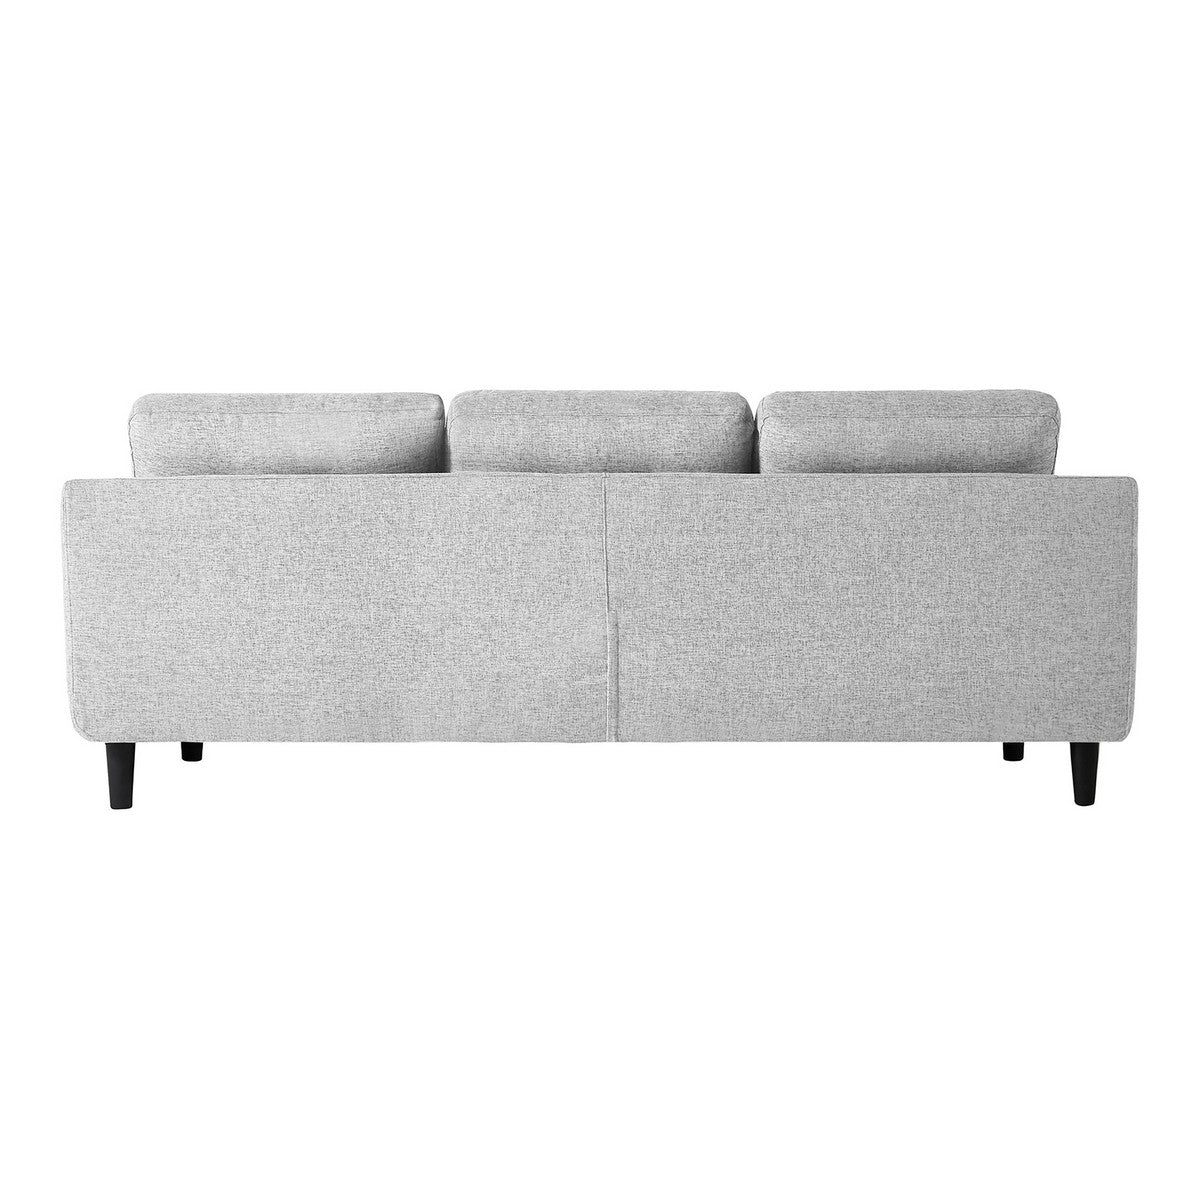 Moe's Home Collection Belagio Sofa Bed With Chaise Light Grey Left - MT-1019-29-L